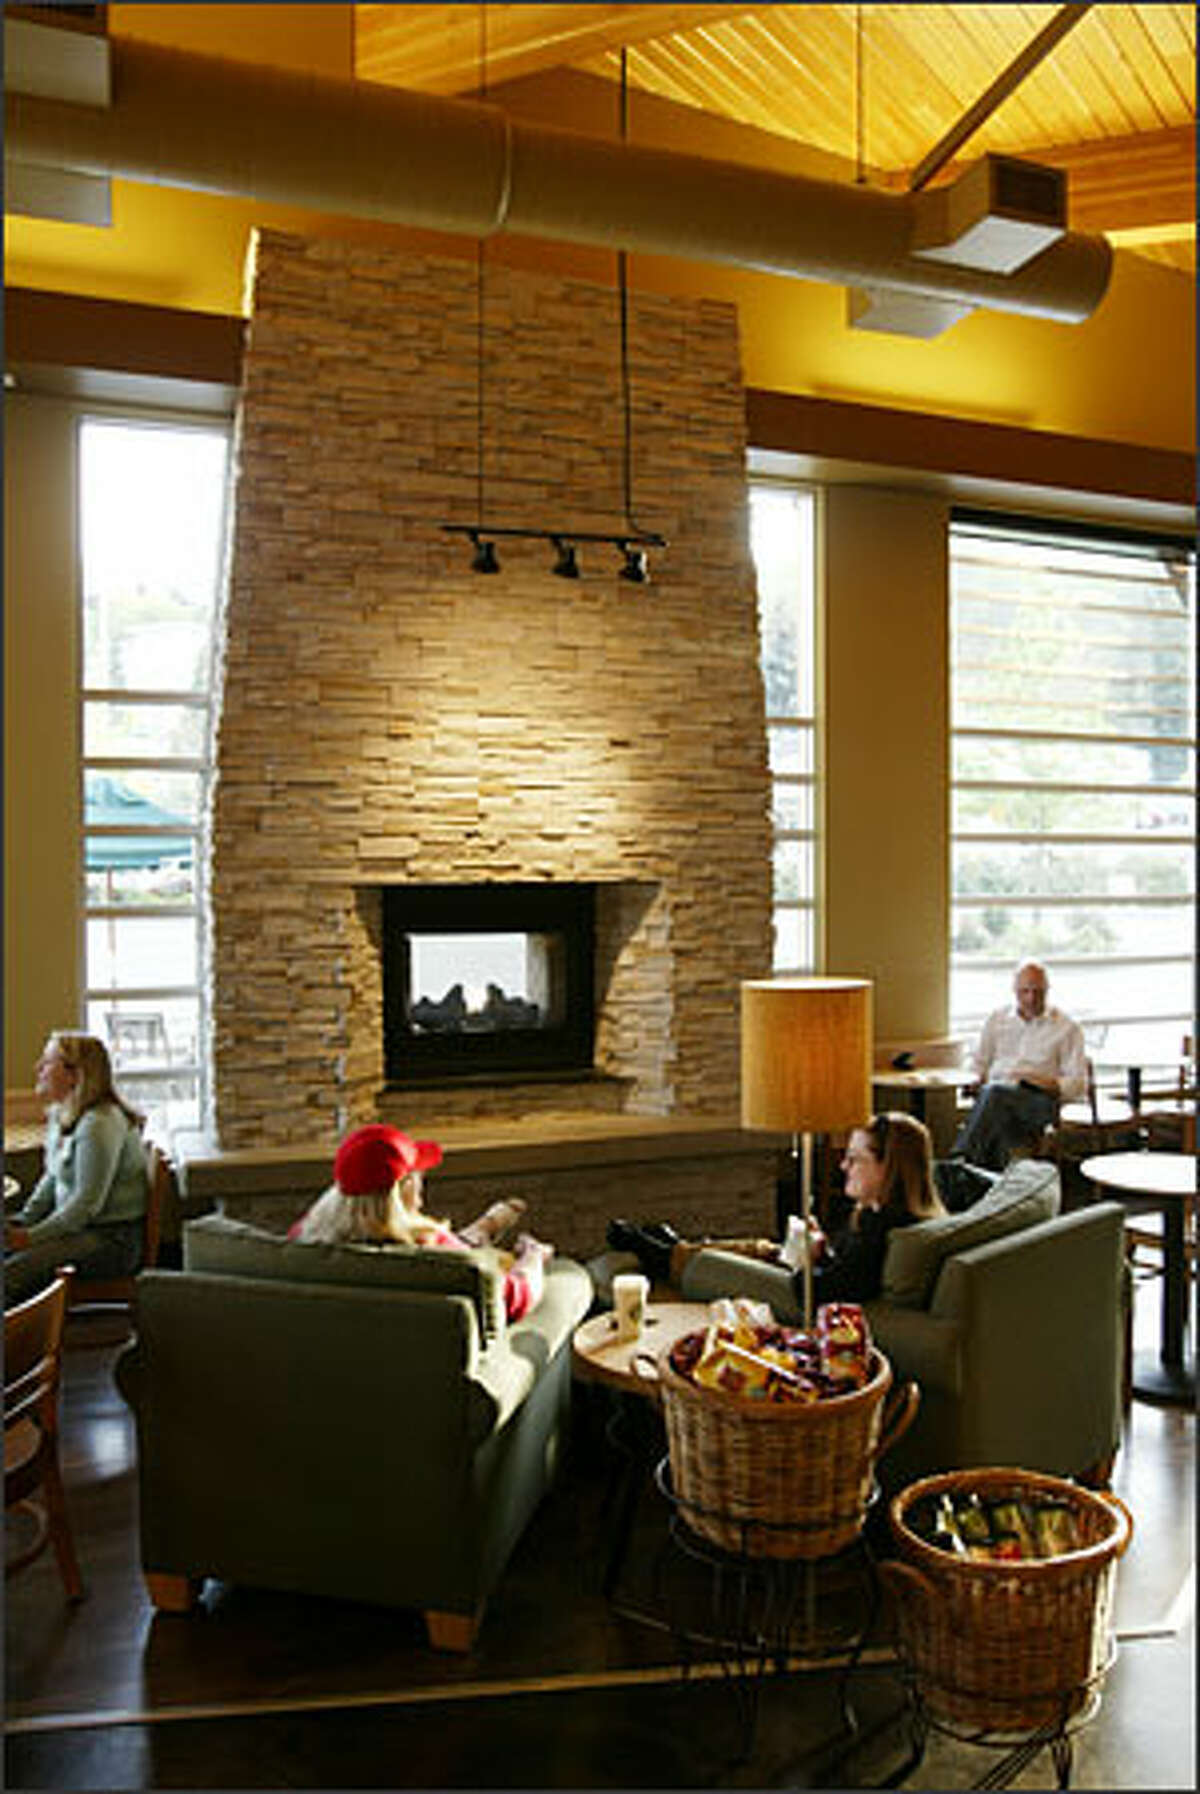 Starbucks put drama in its new Mercer Island store with an indoor/ outdoor gas fireplace.